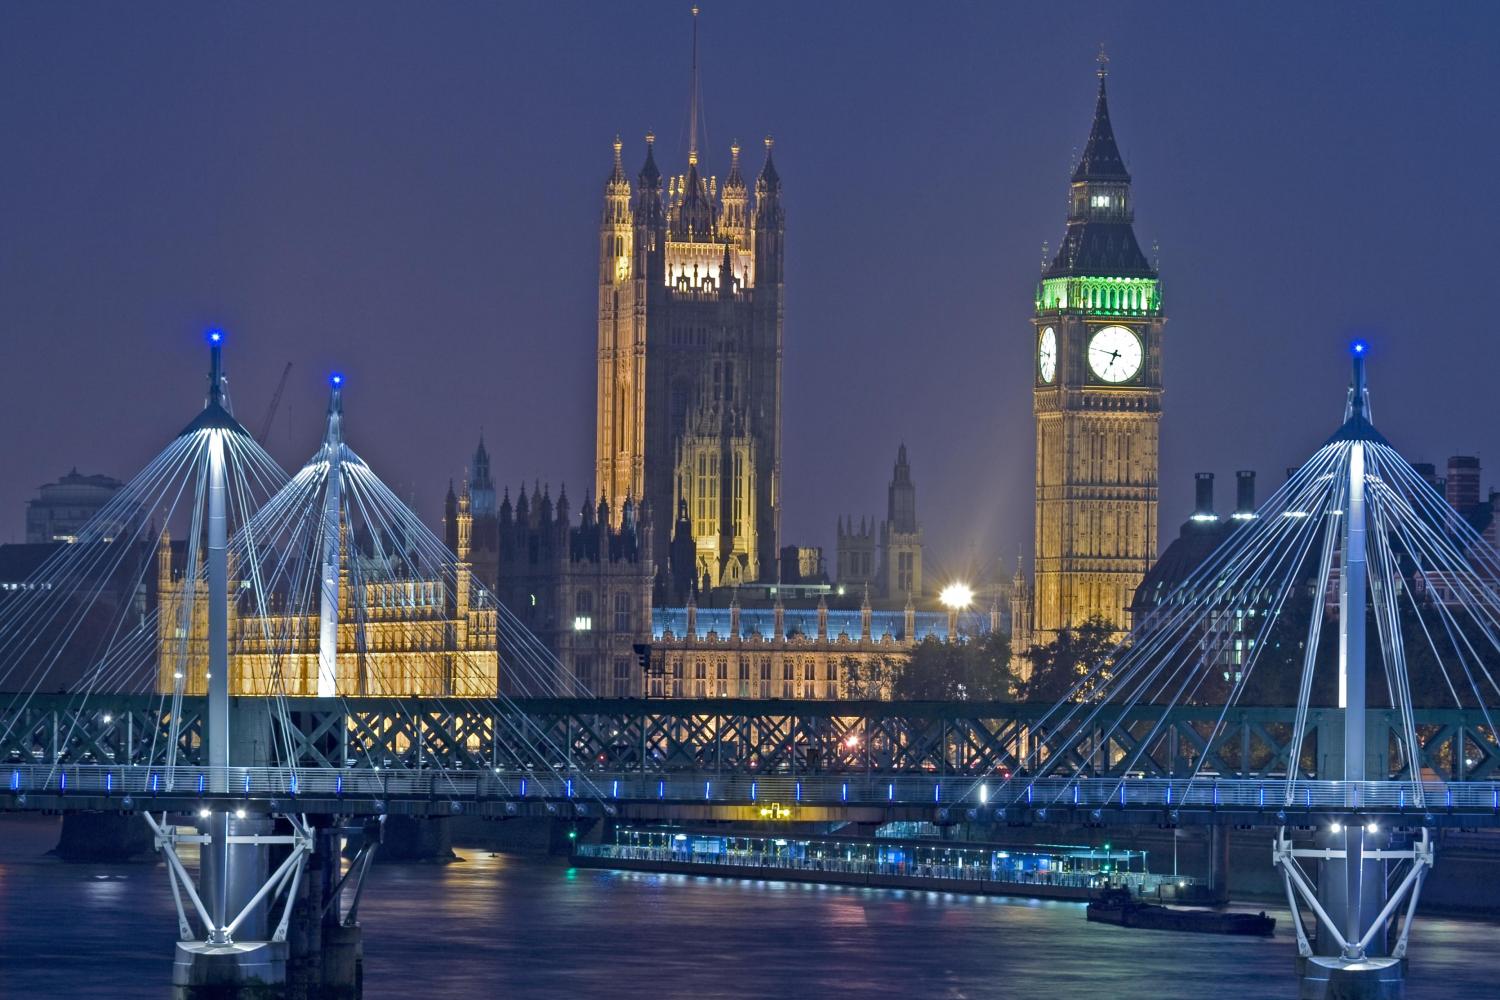 Make Your London Tour Memorable with These Christmas Tours